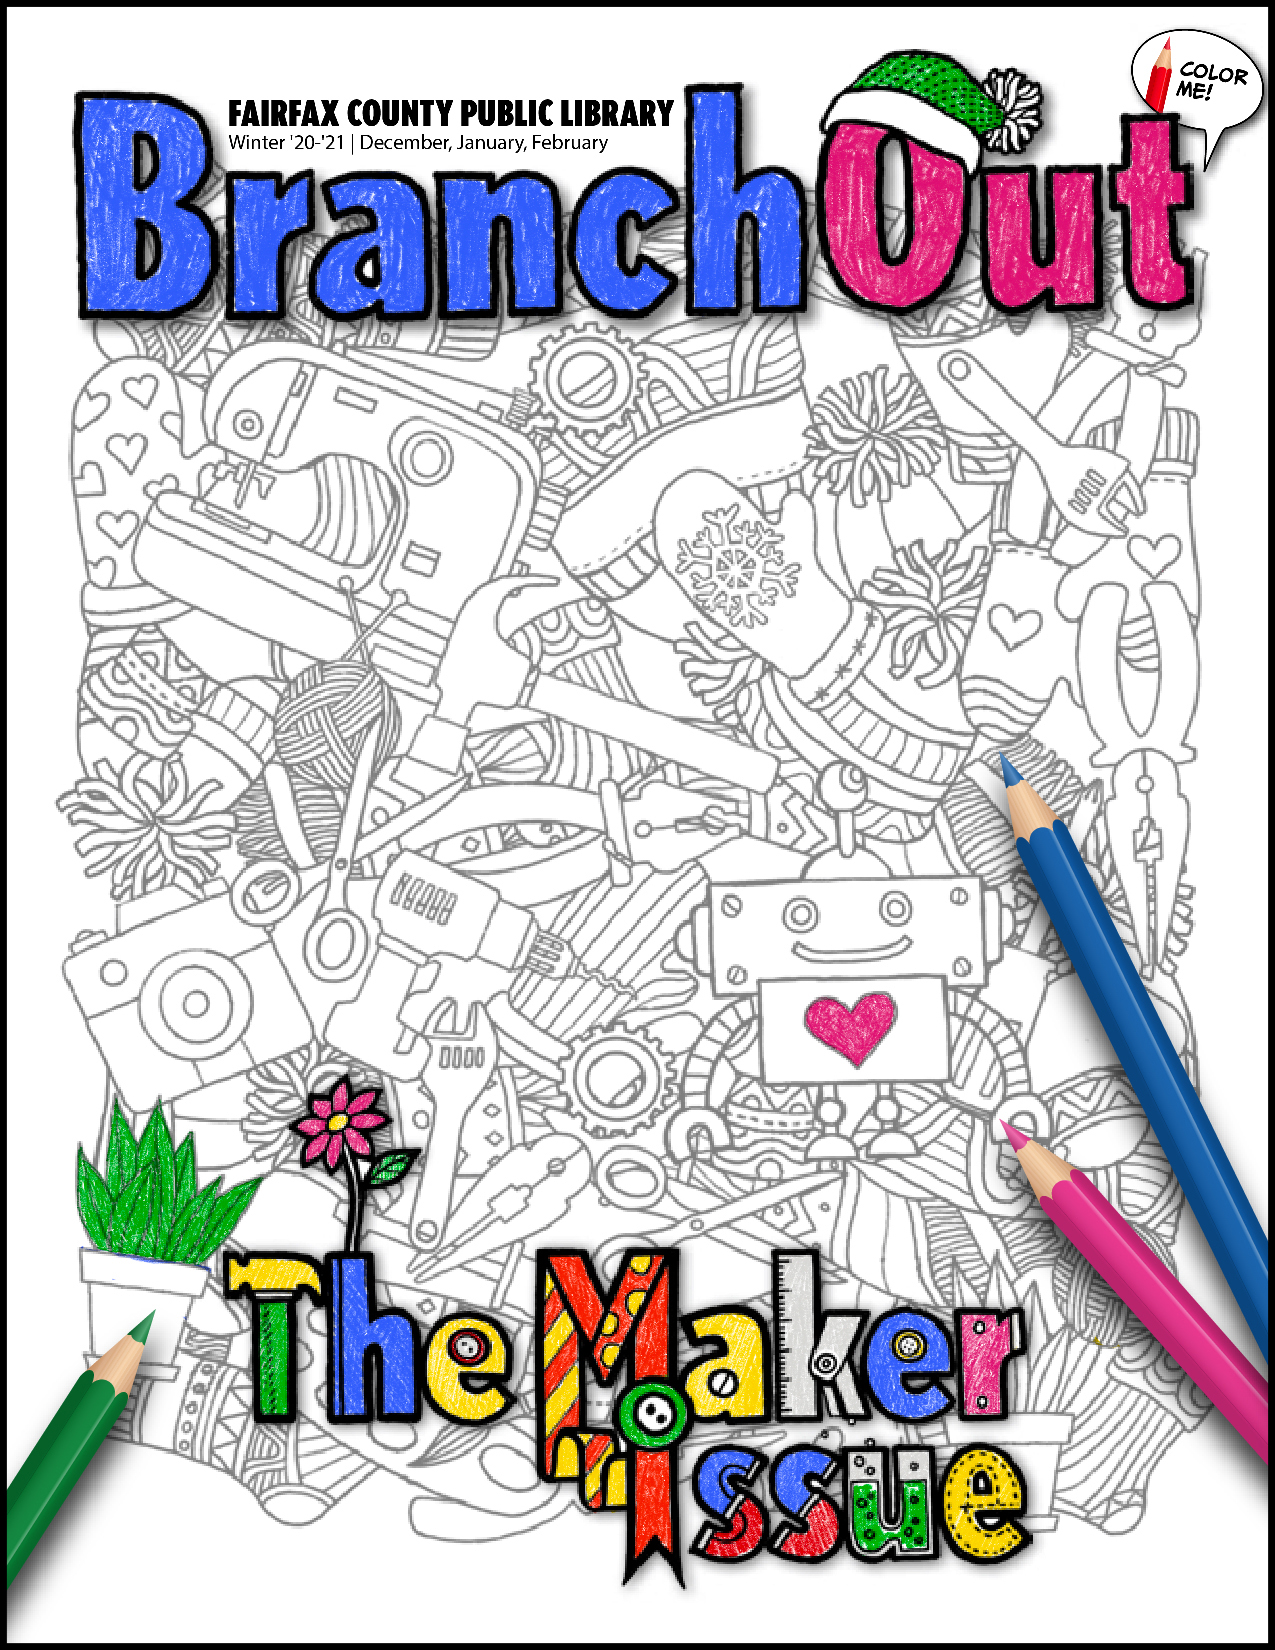 Branch Out cover art